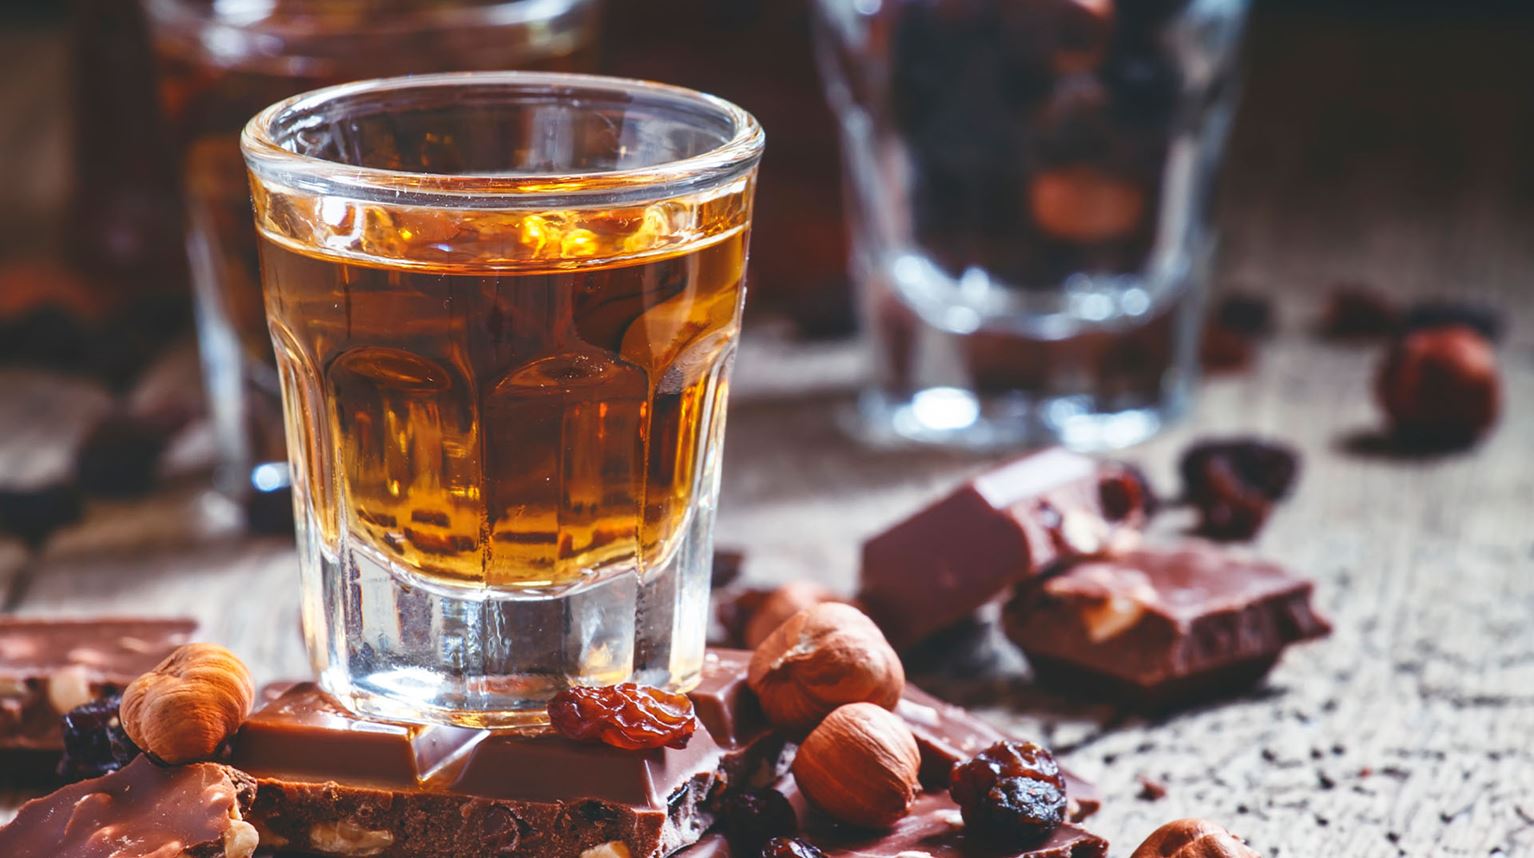 Glass of whisky on counter with nuts and chocolate